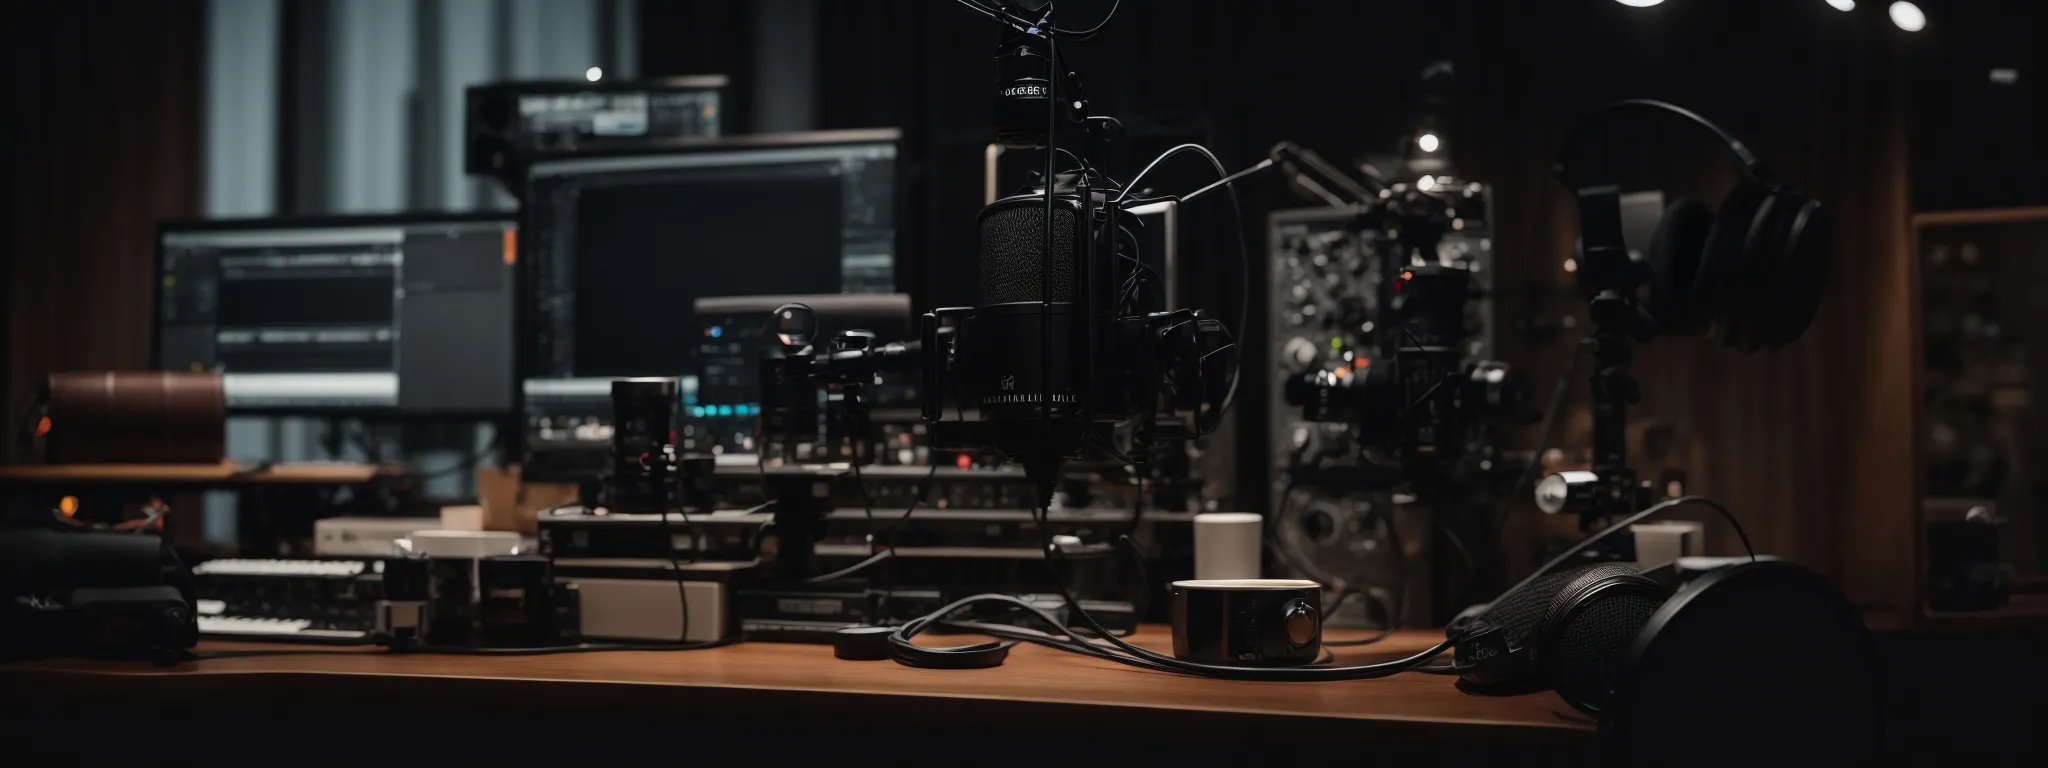 a podcast studio with microphones and headphones awaits the arrival of leading seo experts for an insightful recording session.